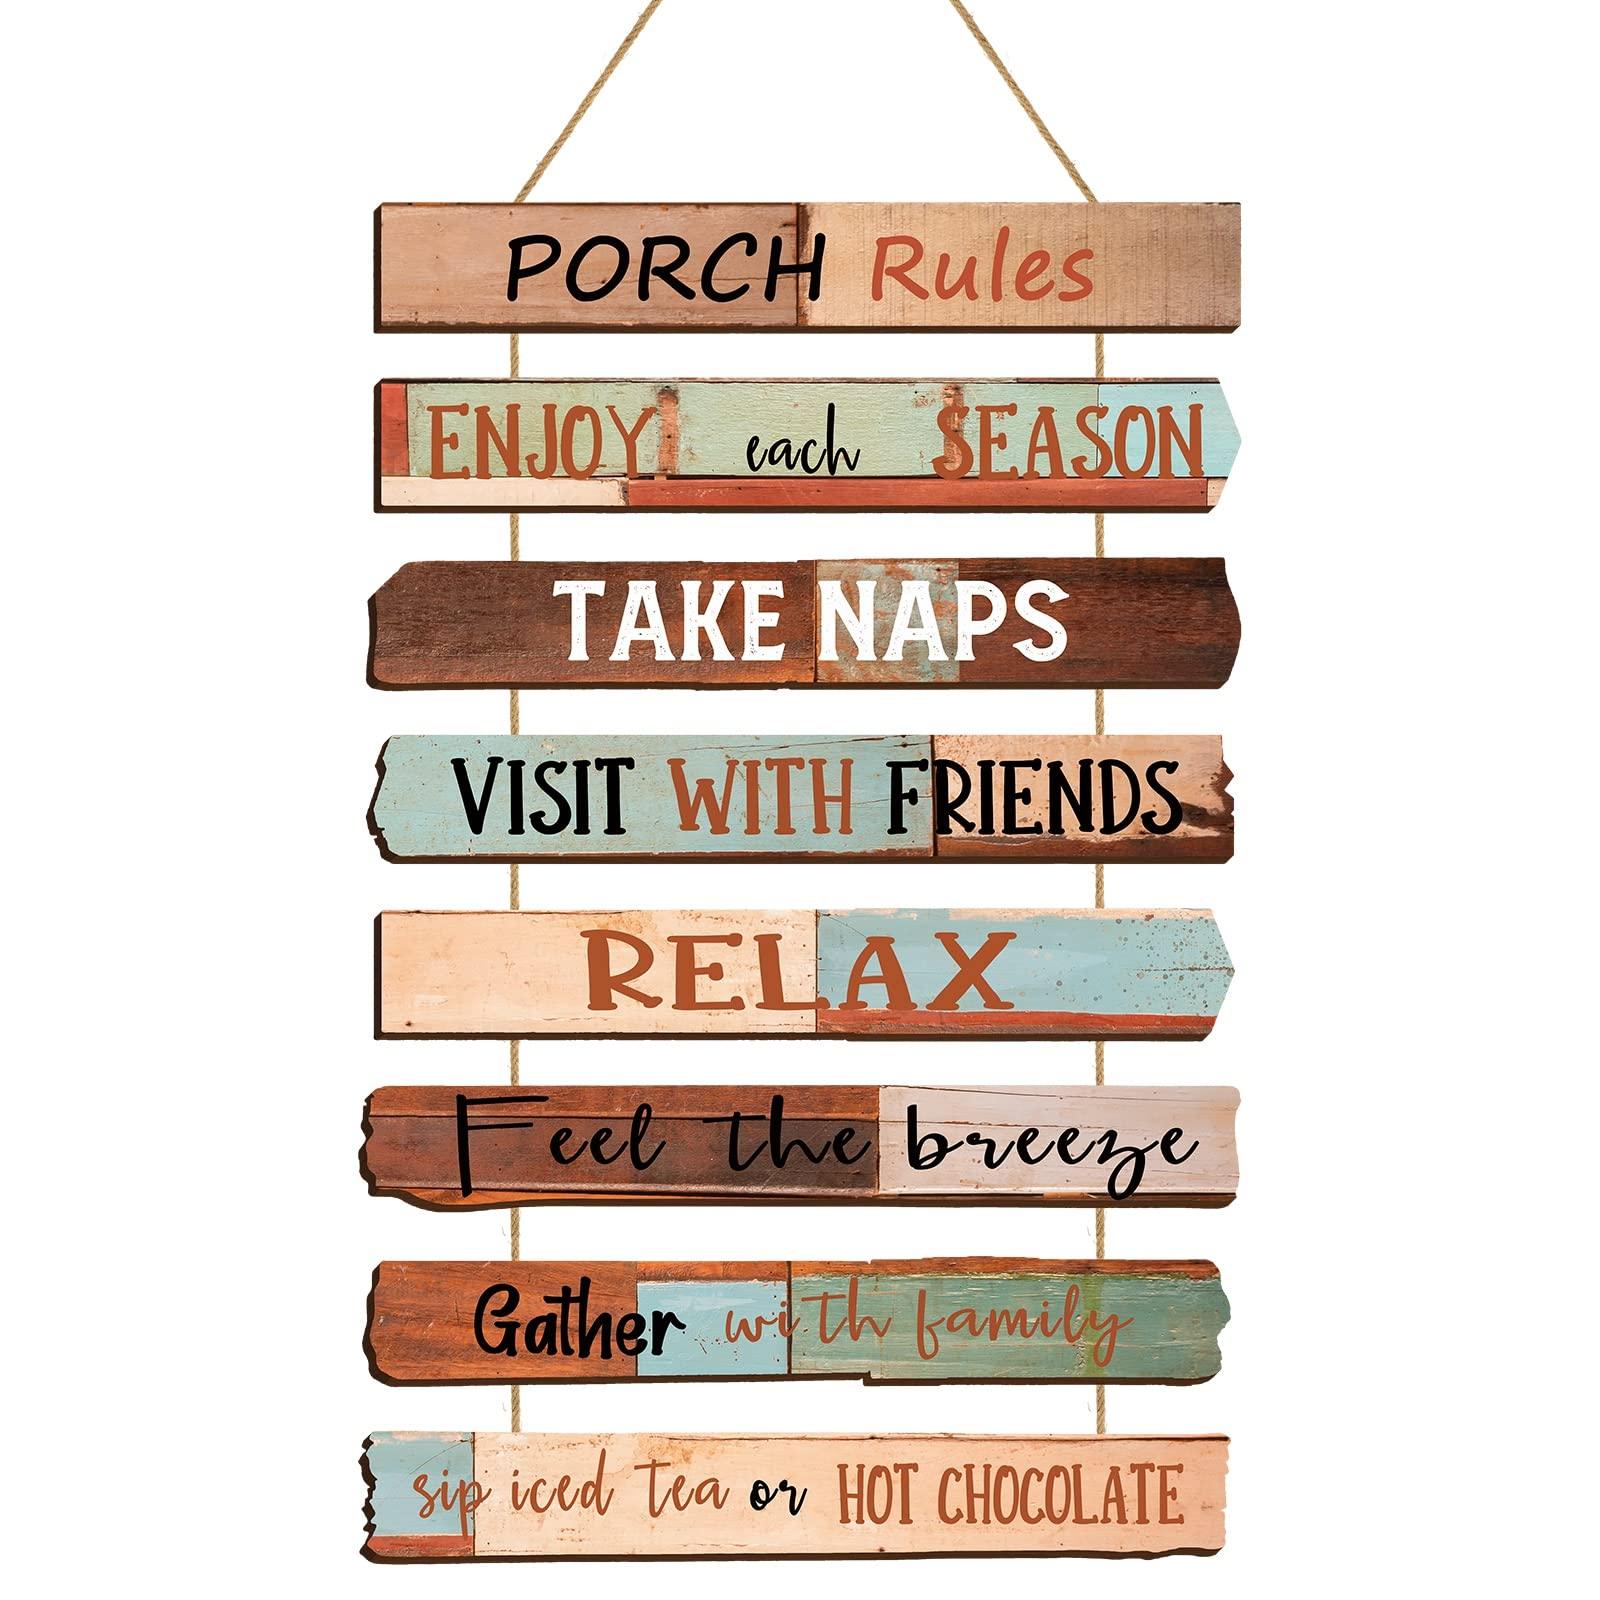 Porch Rules Sign Outdoor Wood Plaque Porch Signs Wall Art Porch Rule Wall Decor Relax Take Naps Quotes Rustic Vintage Wooden Hanging Wall Art Gift for Home Farmhouse Porch Patio Garden Door Decoration - CookCave